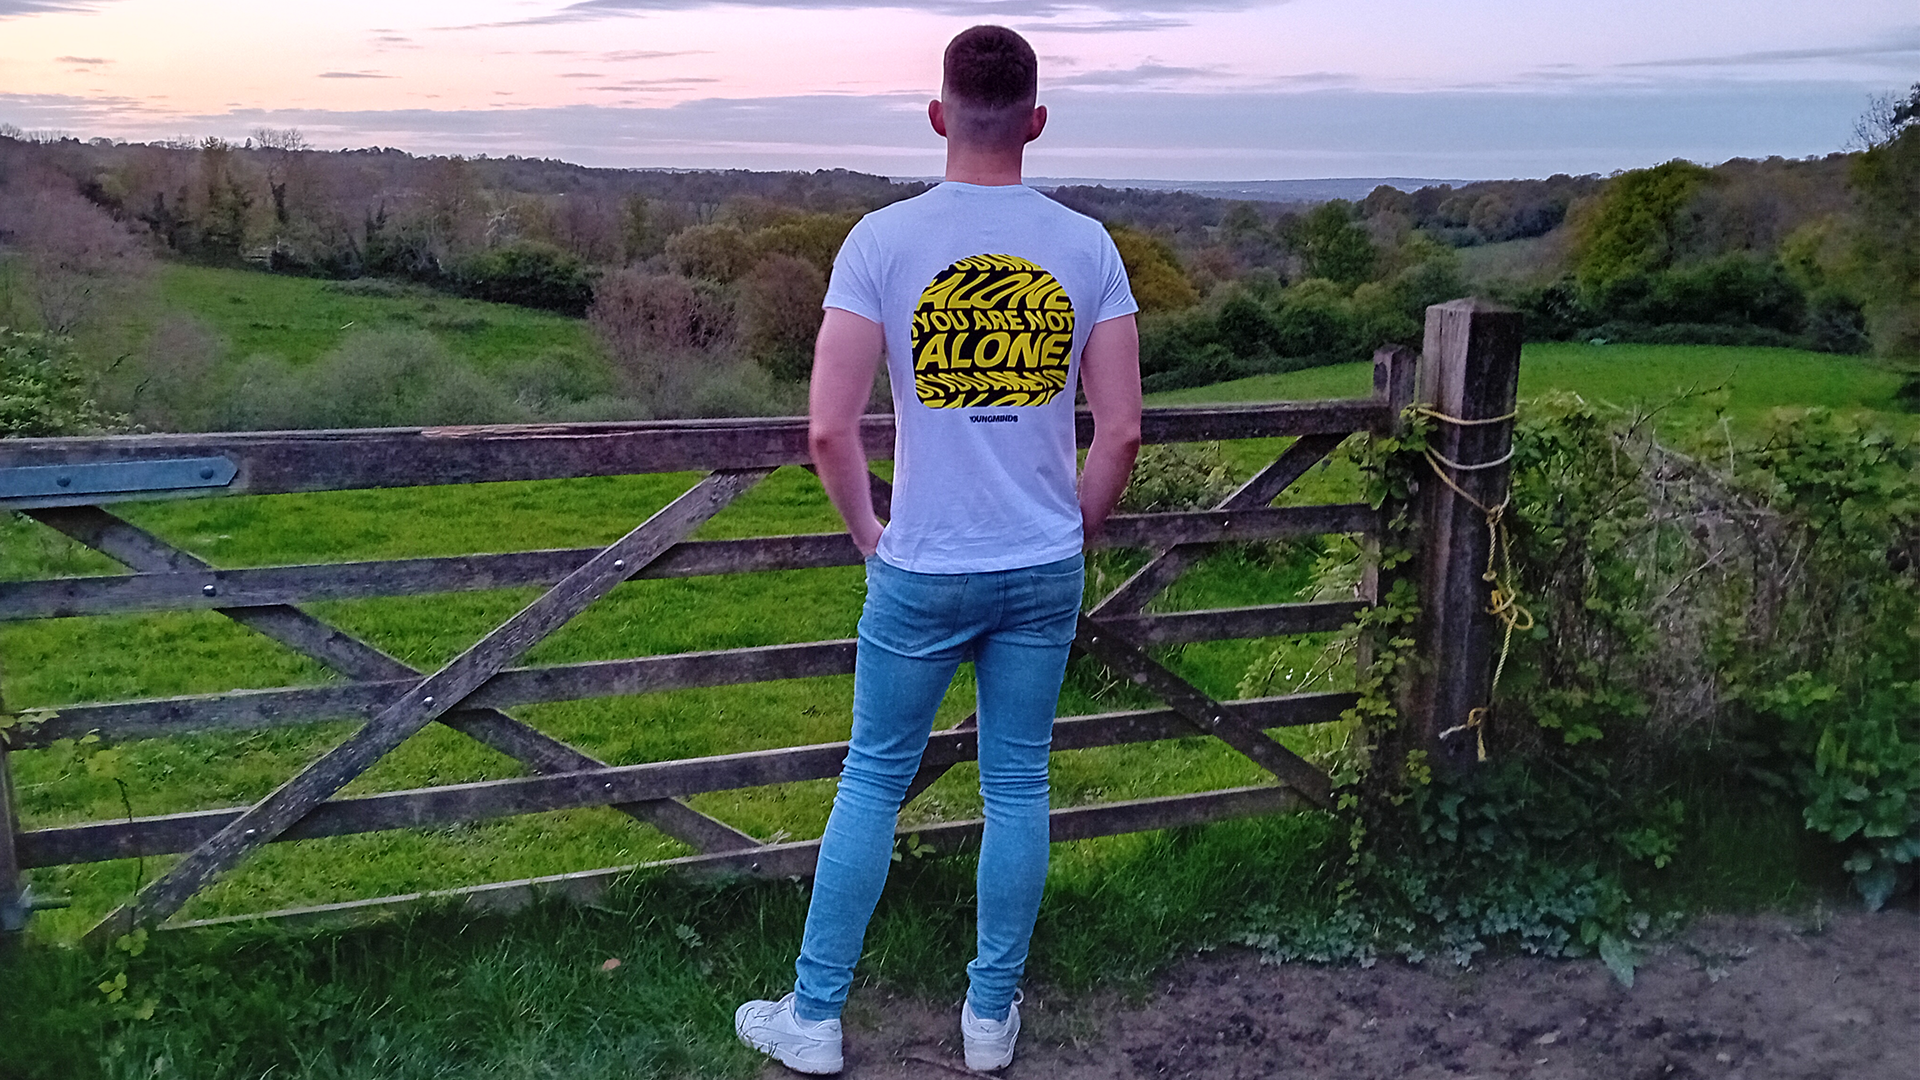 A person stands with their back to the camera, wearing a YoungMinds t-shirt. They are looking out over the fields in the countryside.